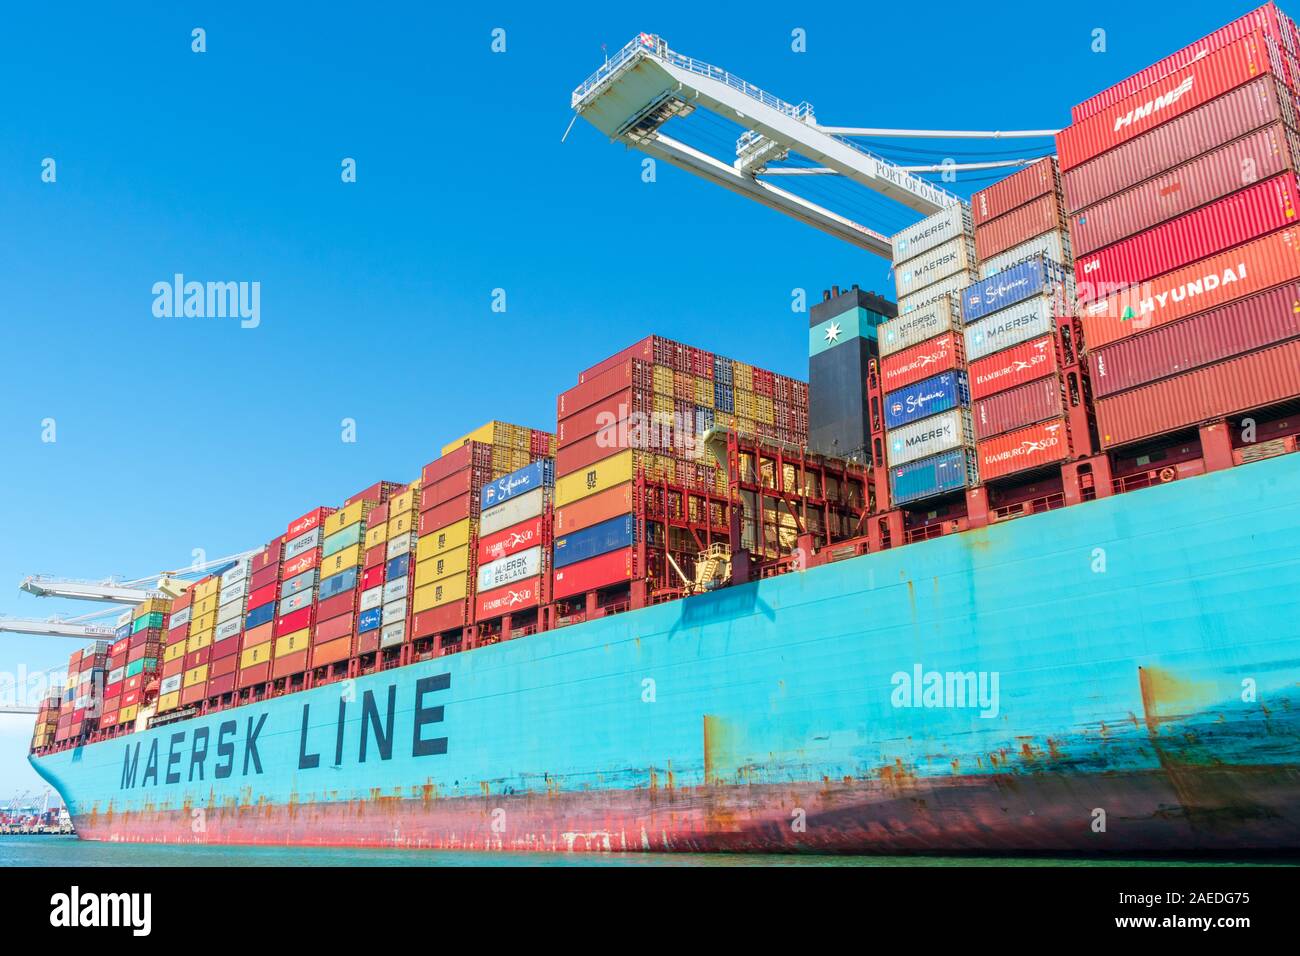 Colorful cargo shipping containers stacked aboard of container ship Maersk Line during cargo loading and unloading operation under blue sky - Oakland, Stock Photo